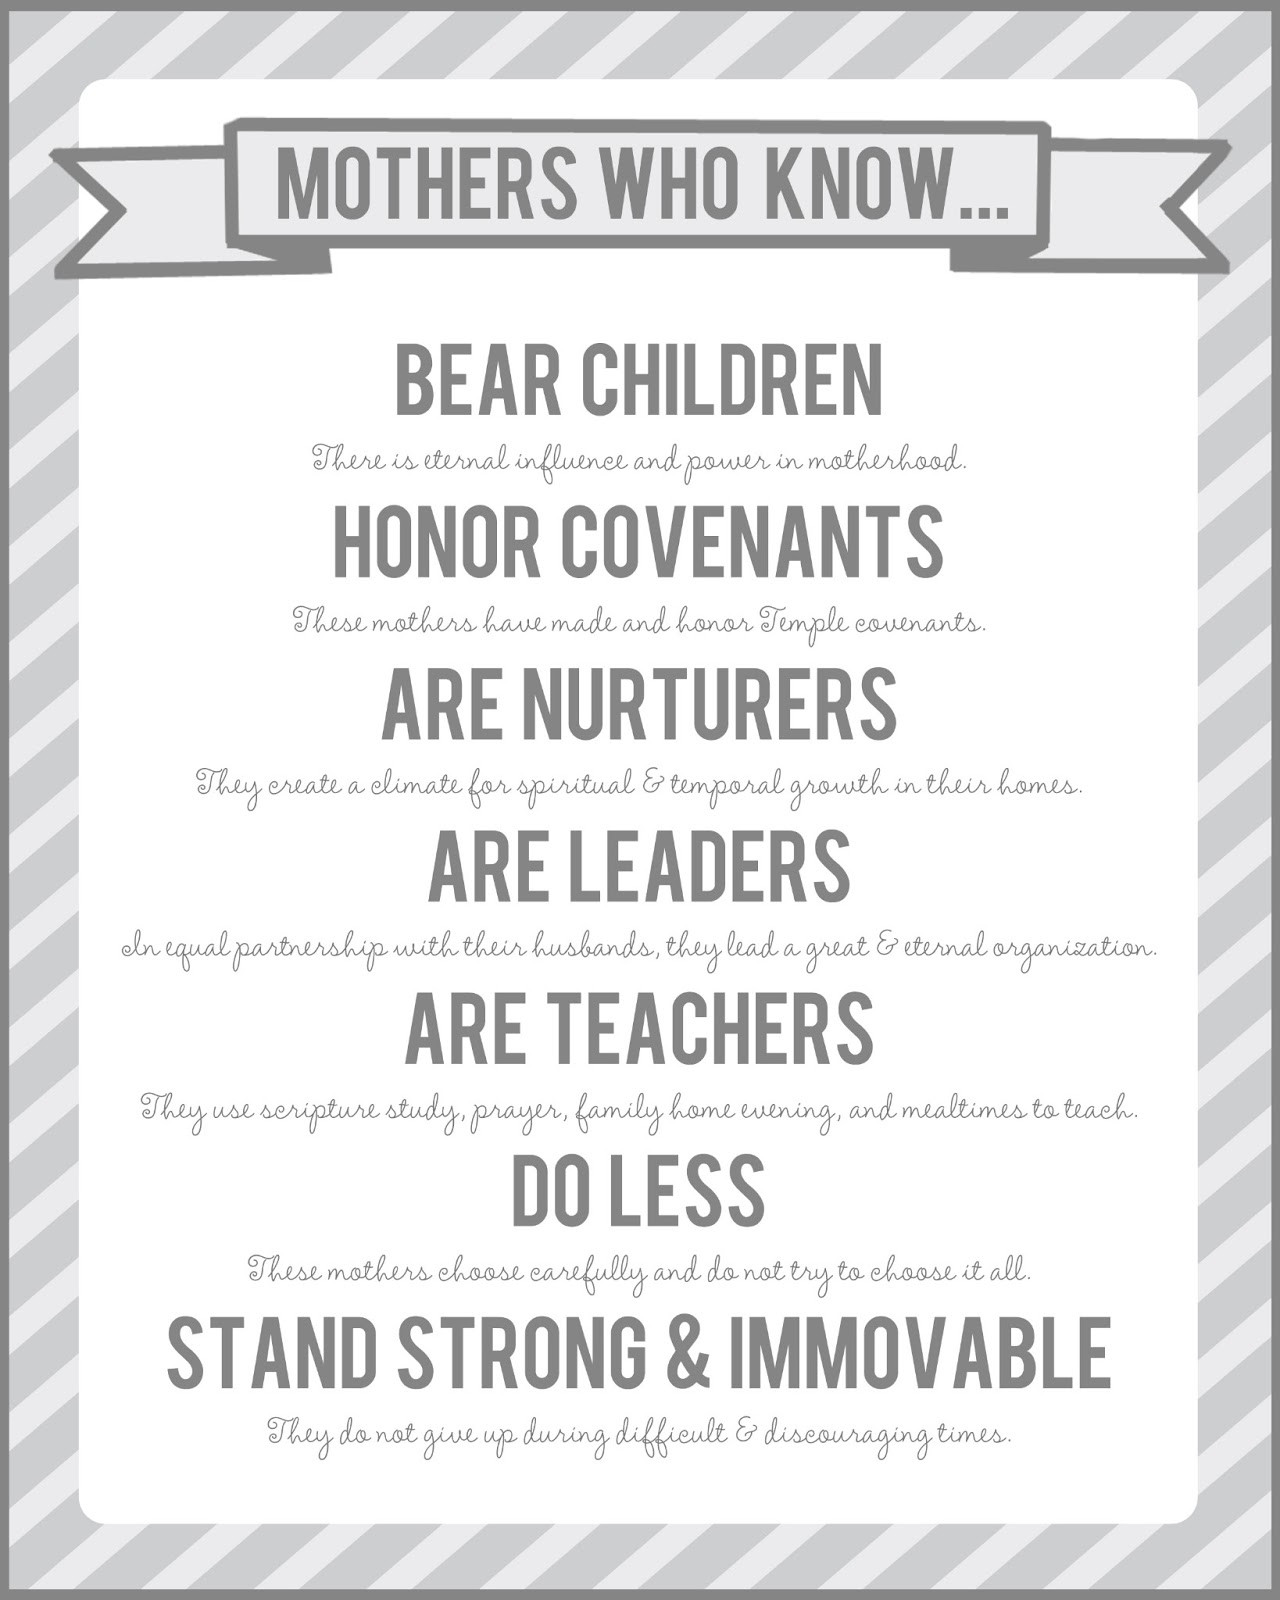 Lds Quotes About Motherhood
 A Year of FHE Mothers Who Know FREE 8x10" printable poster